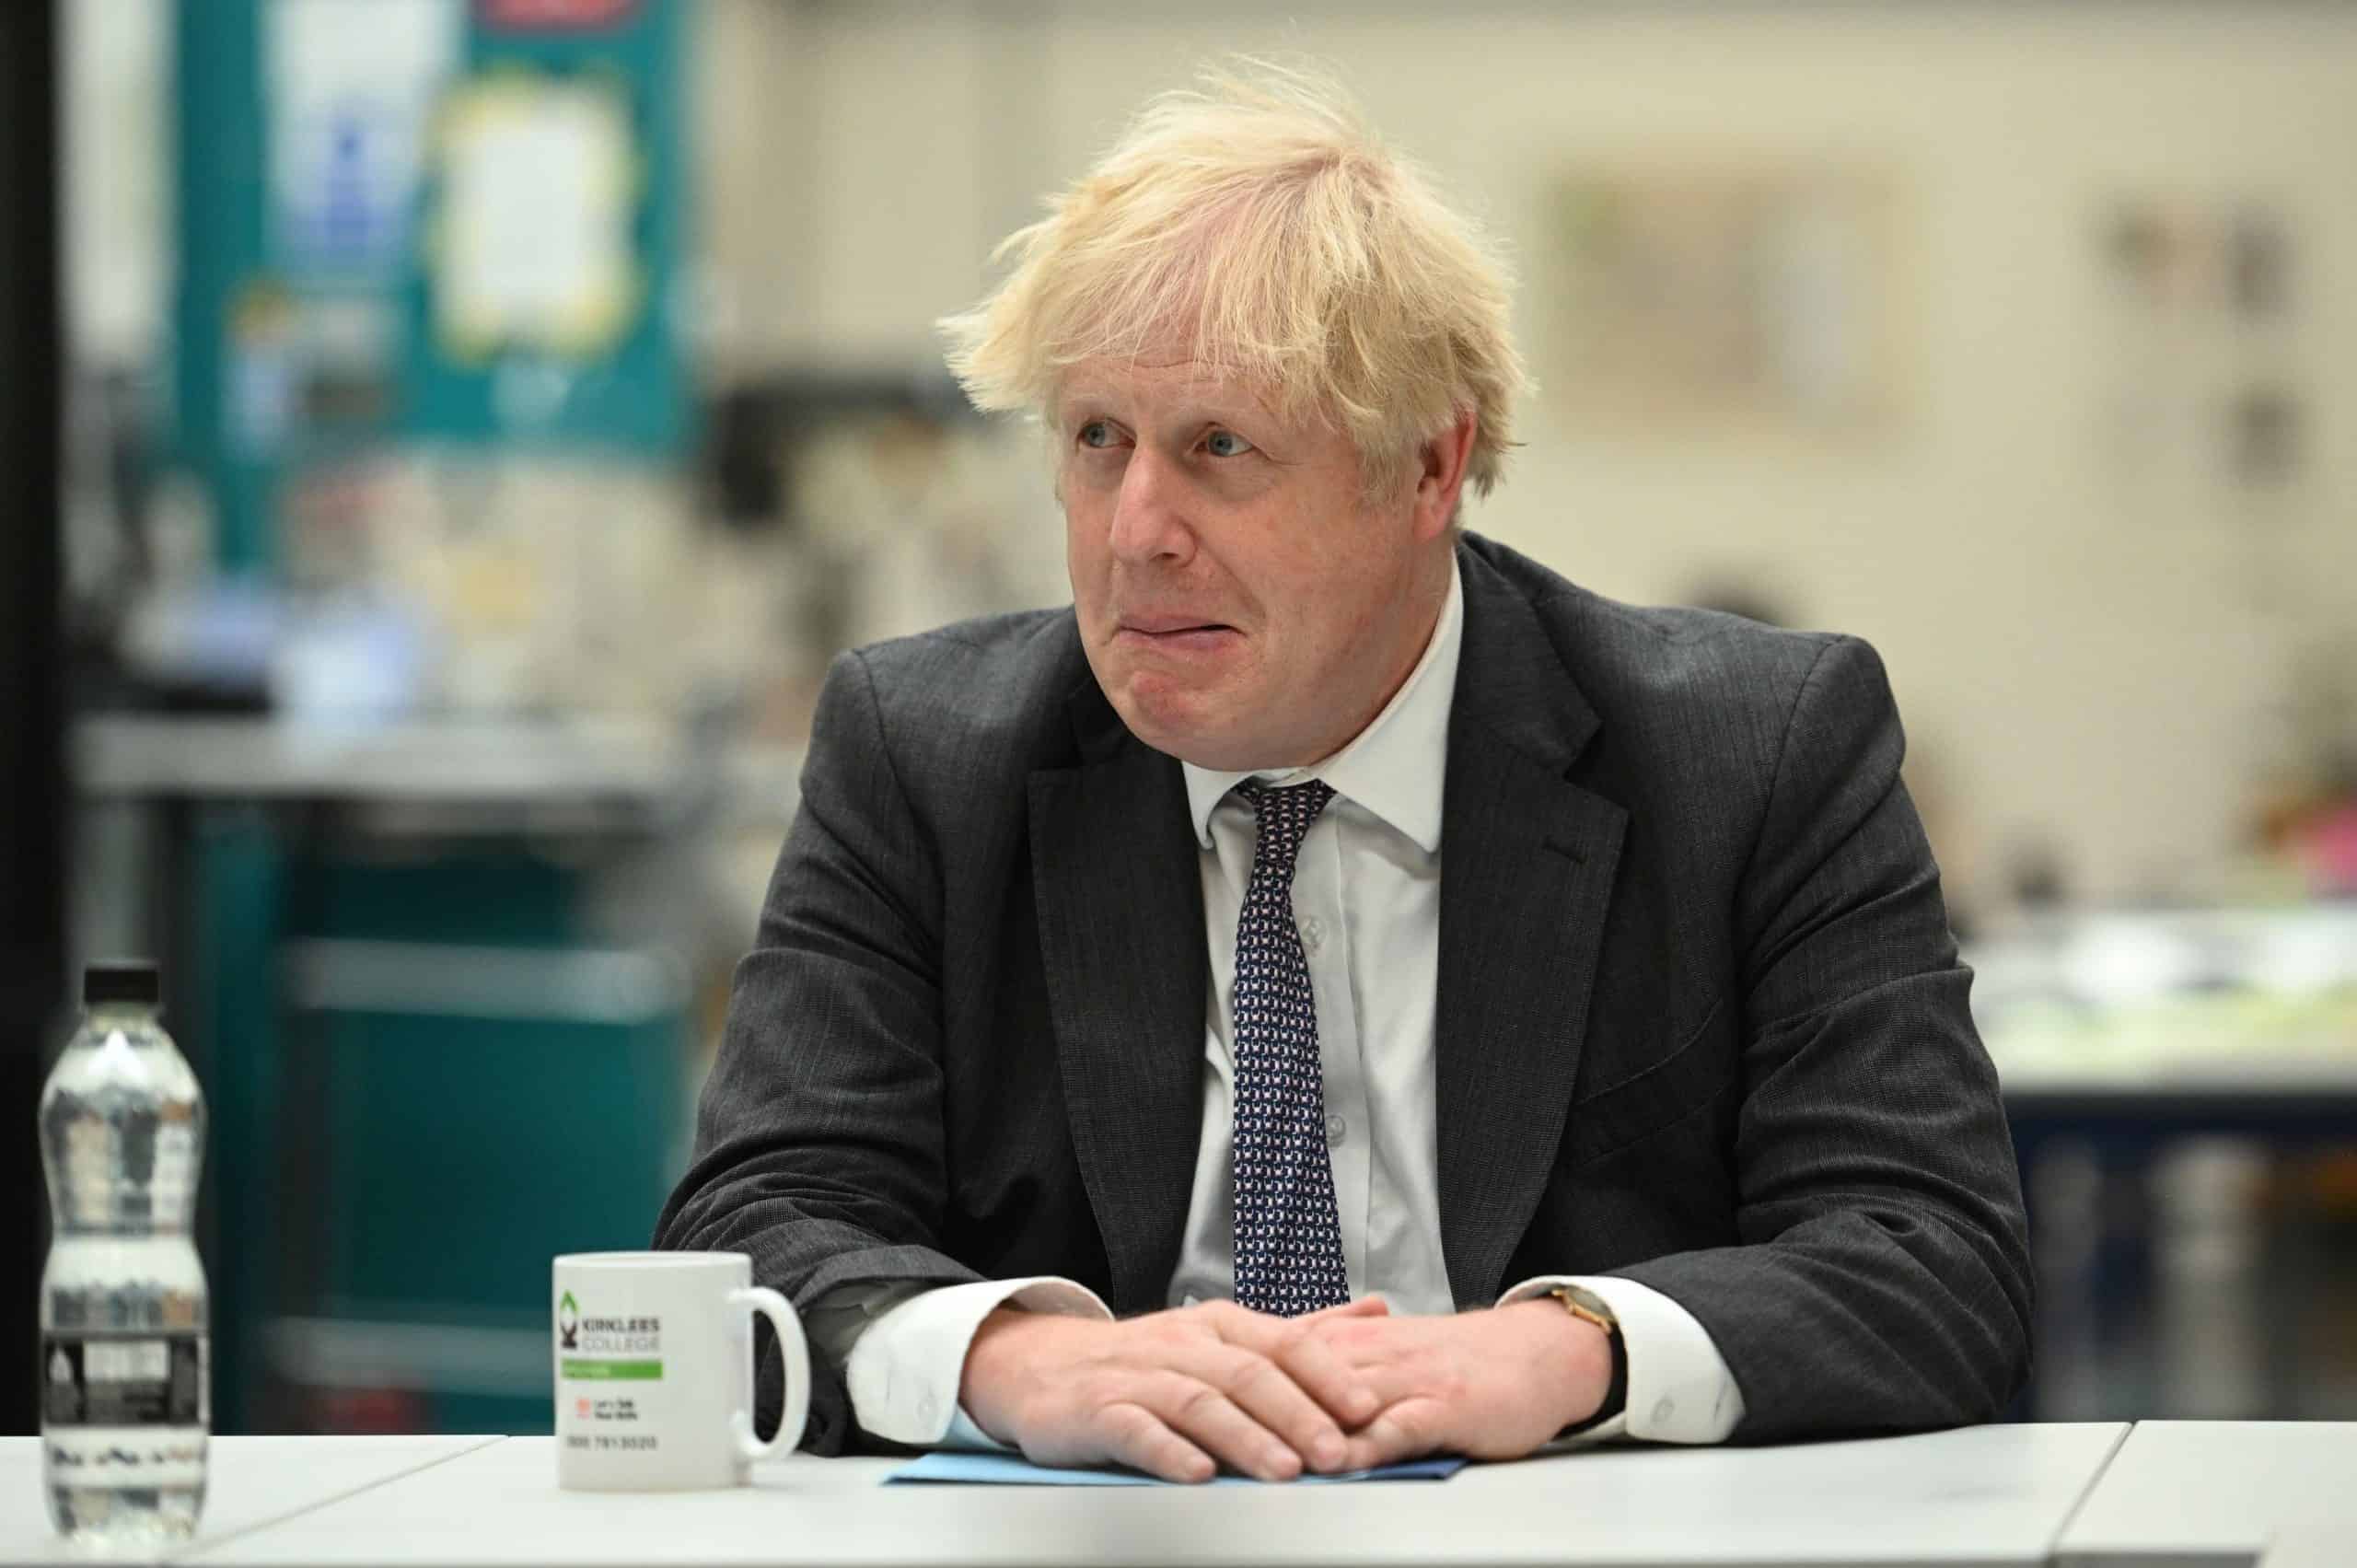 ‘Happy Freedom Day’ trends as Boris Johnson singled out for delay to lockdown lifting